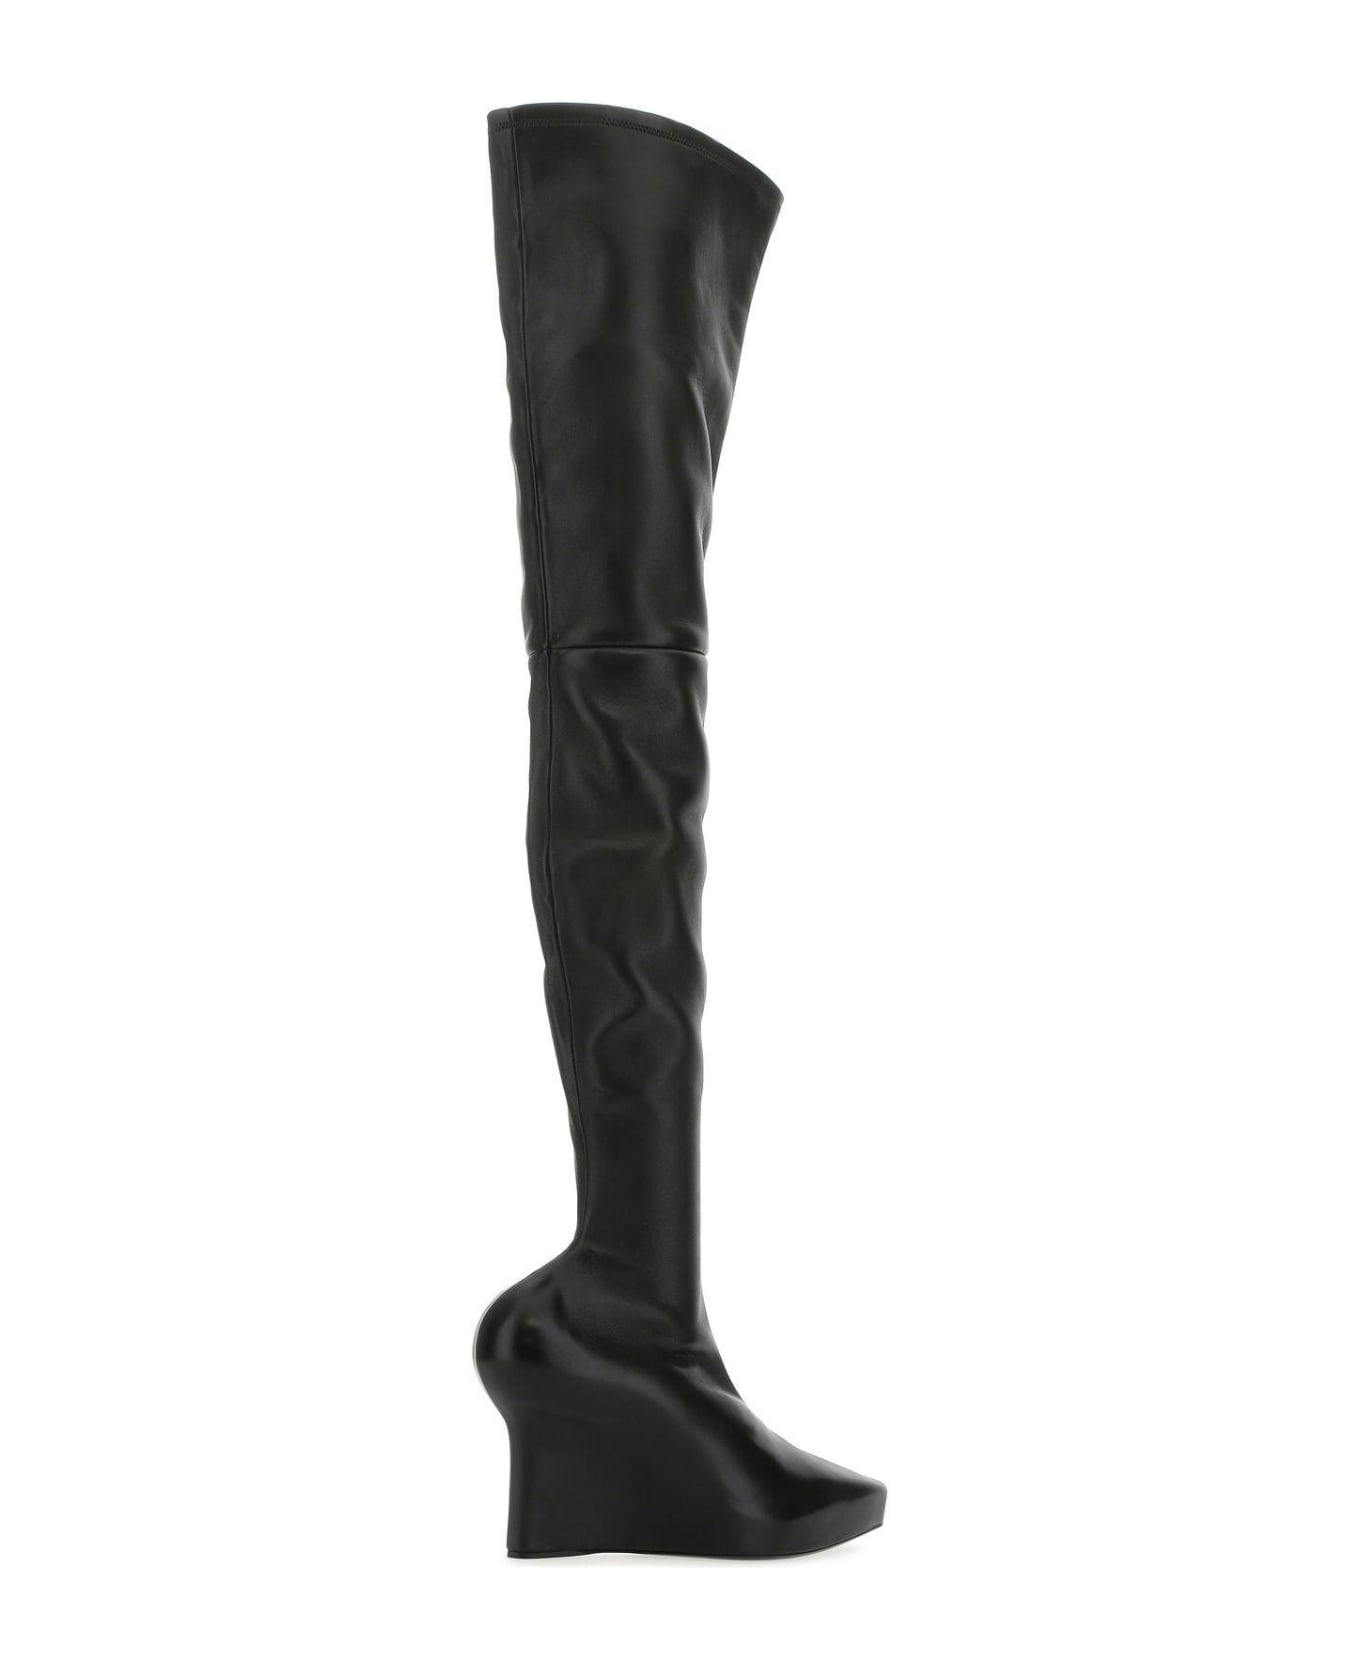 Givenchy Black Nappa Leather Show Boots - Black